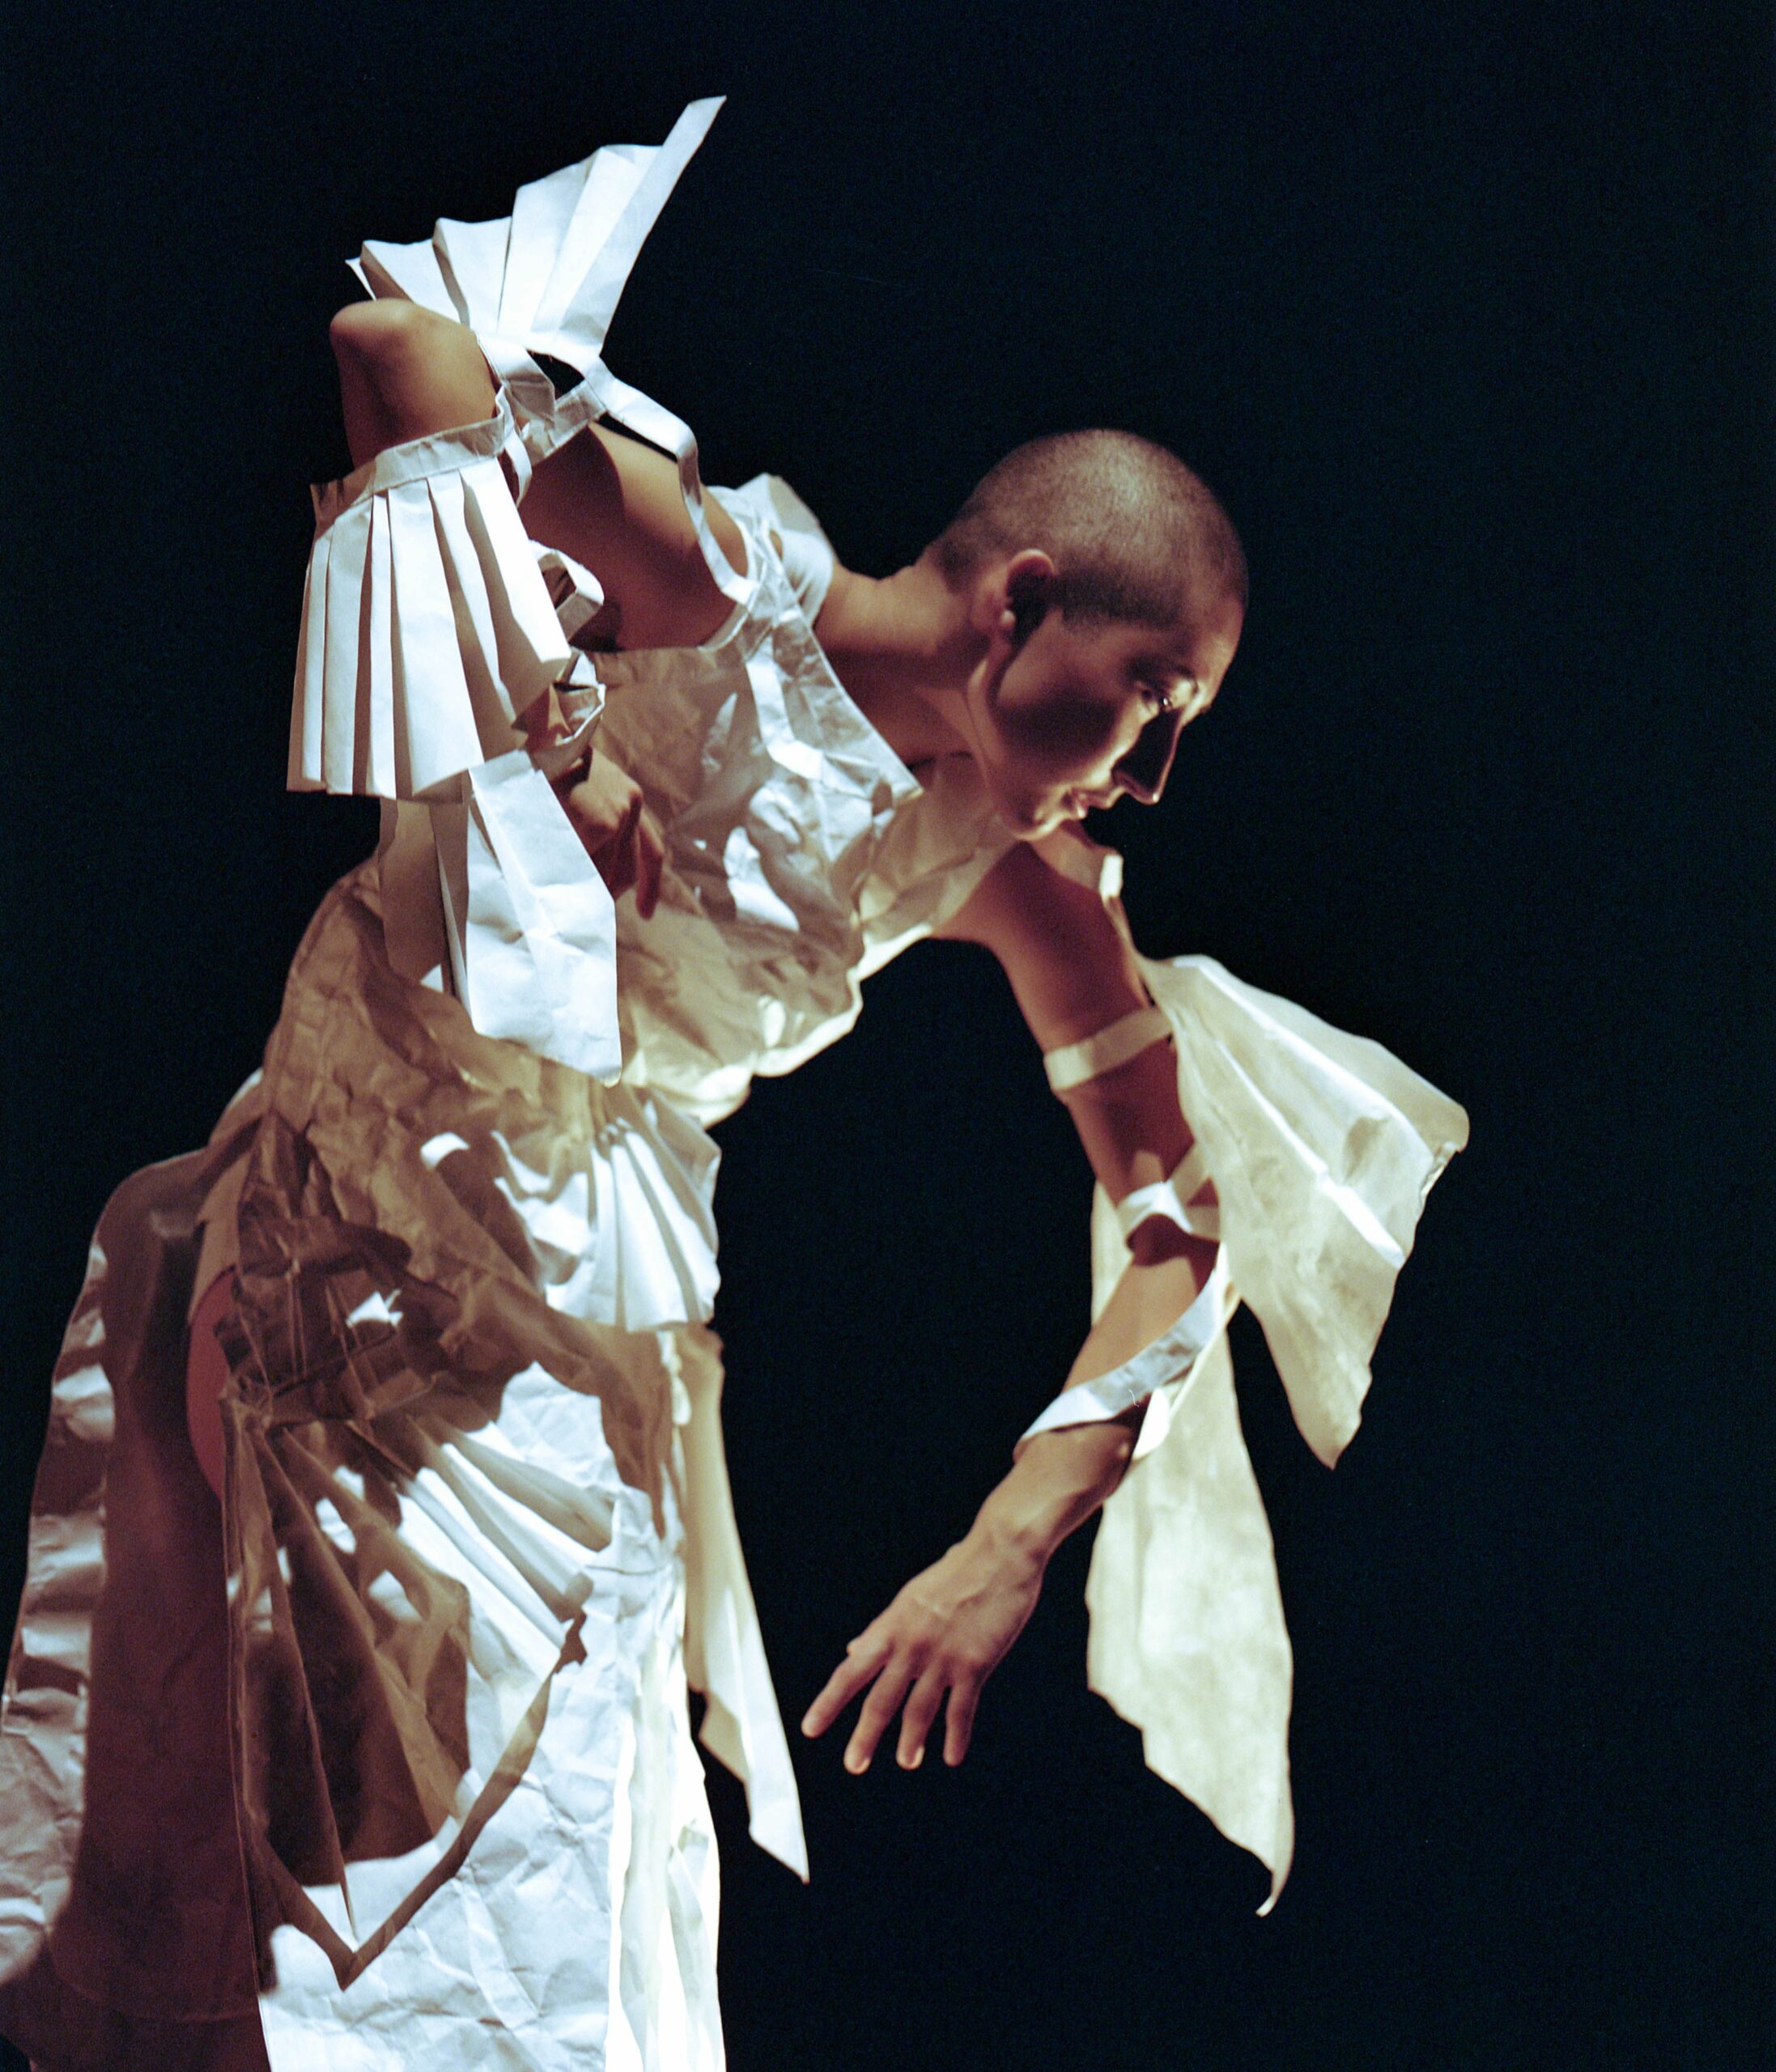 Shion Skye Carter posing in white paper garments in front of a black background